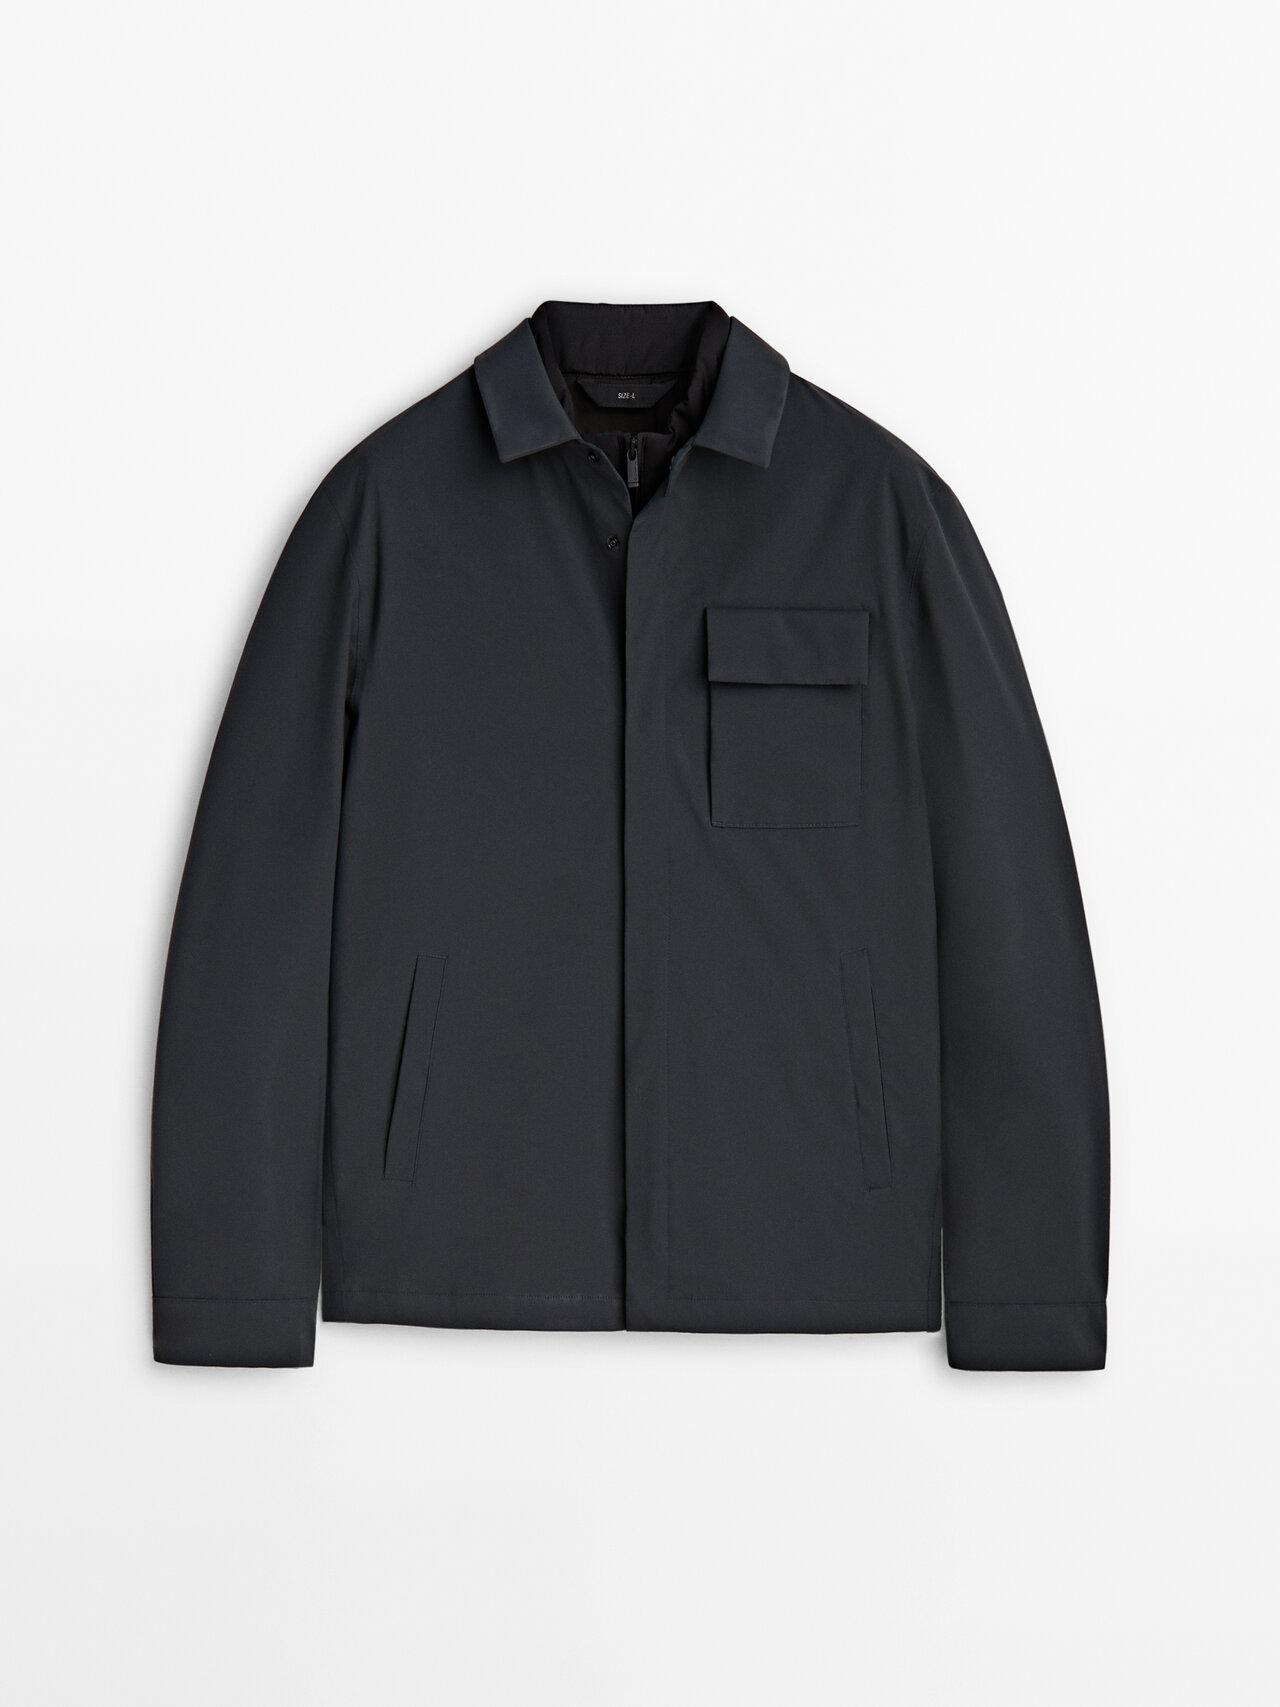 Massimo Dutti 2-in-1 Technical Jacket In Anthracite Grey